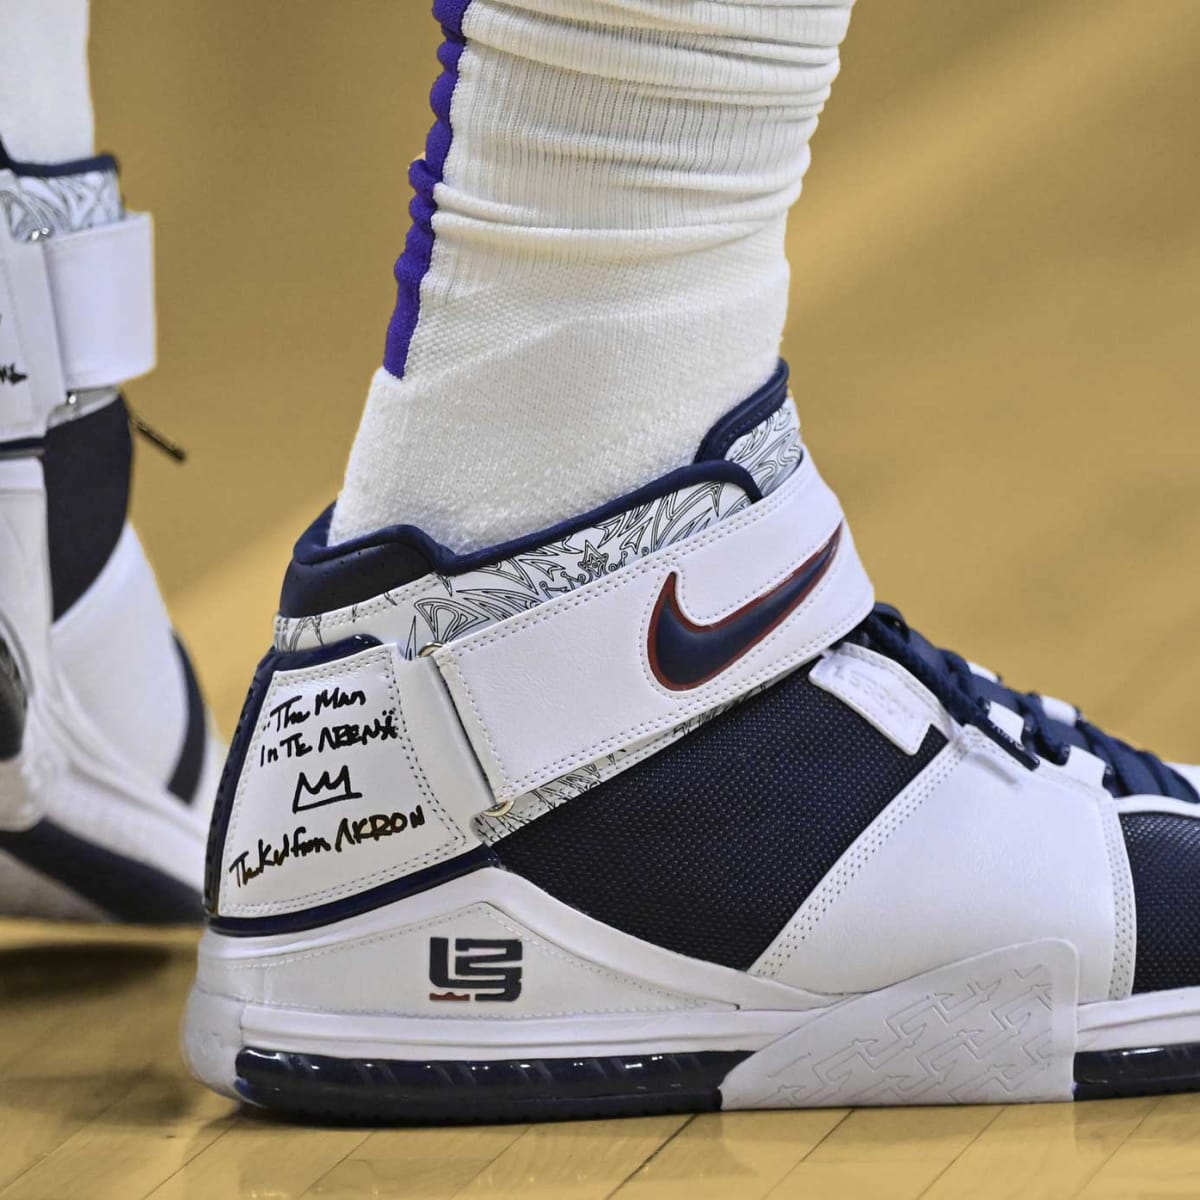 The Nike LeBron shoes worn by Los Angeles Lakers forward LeBron